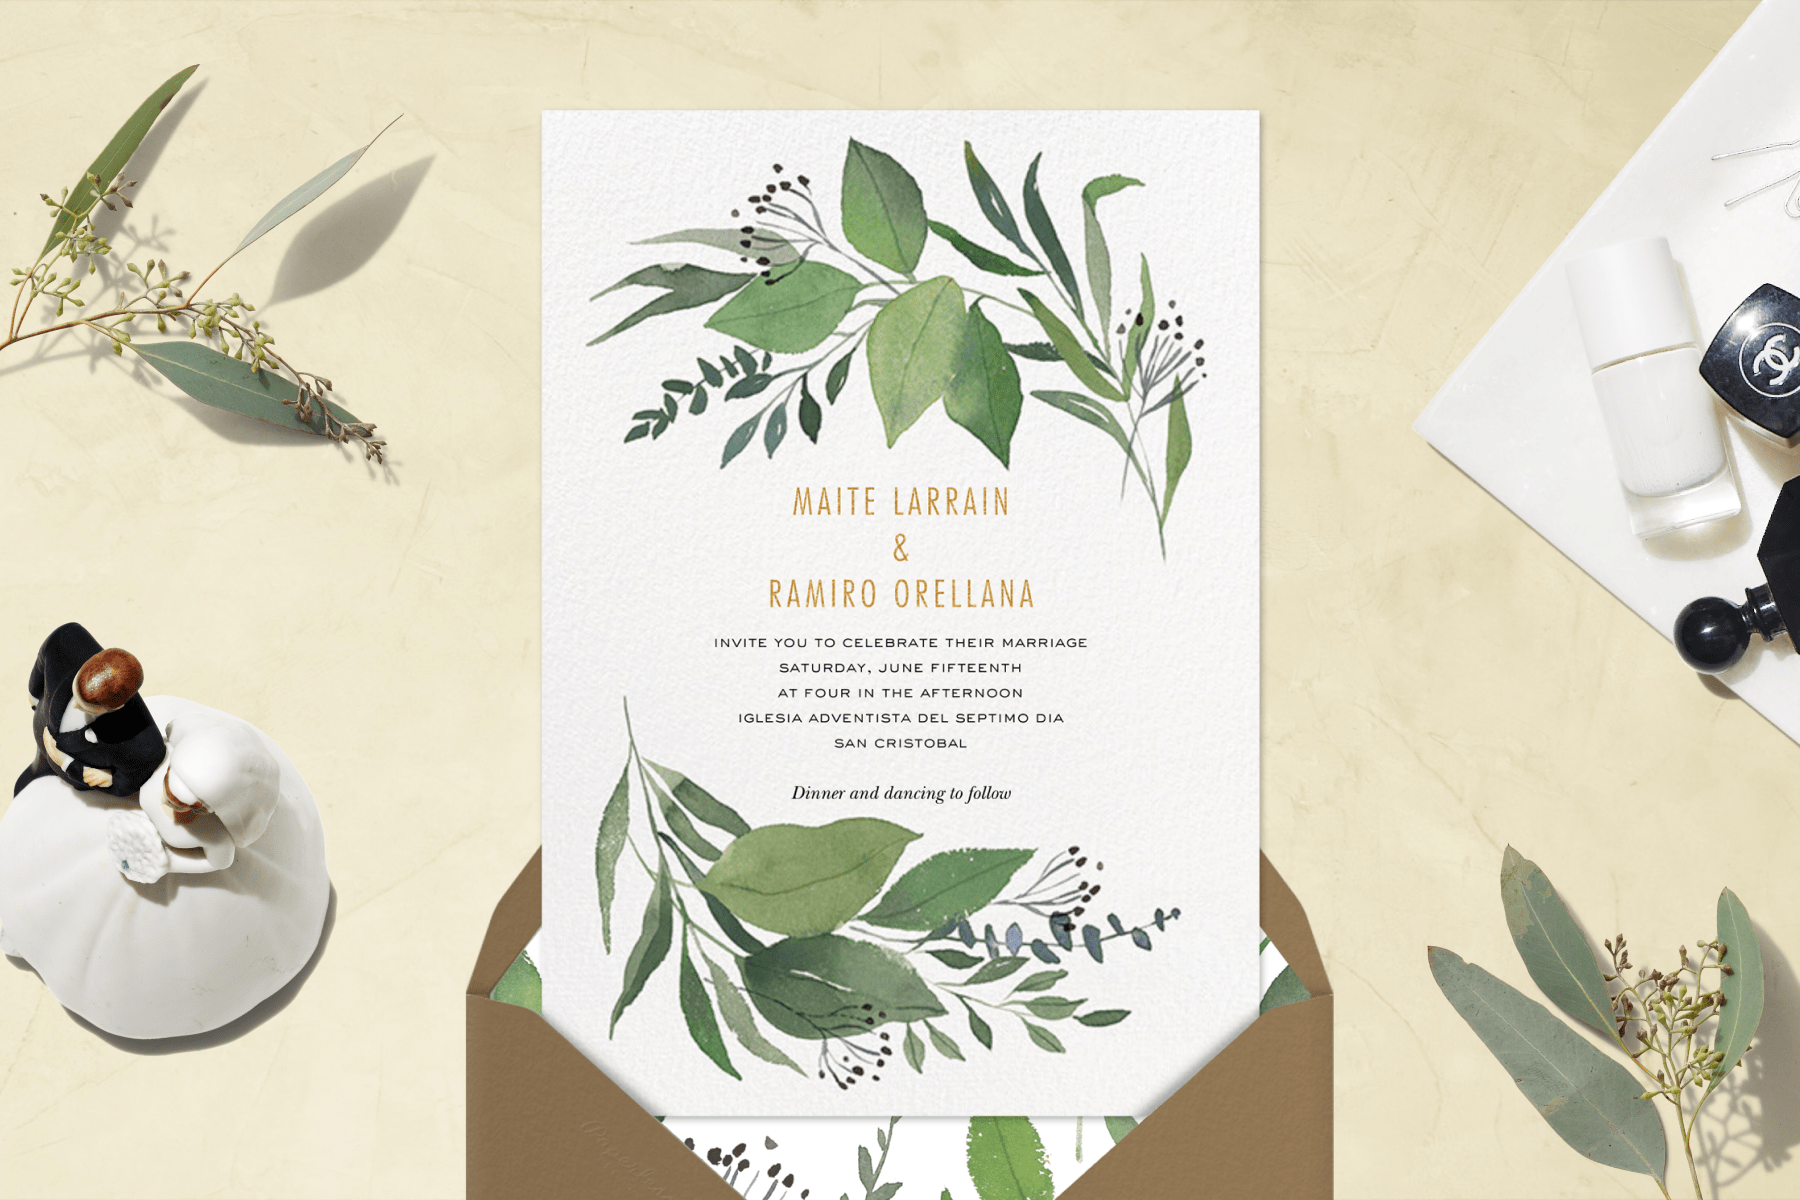 Print Your Own Invitations - Tips and Tricks How to Print Invitations